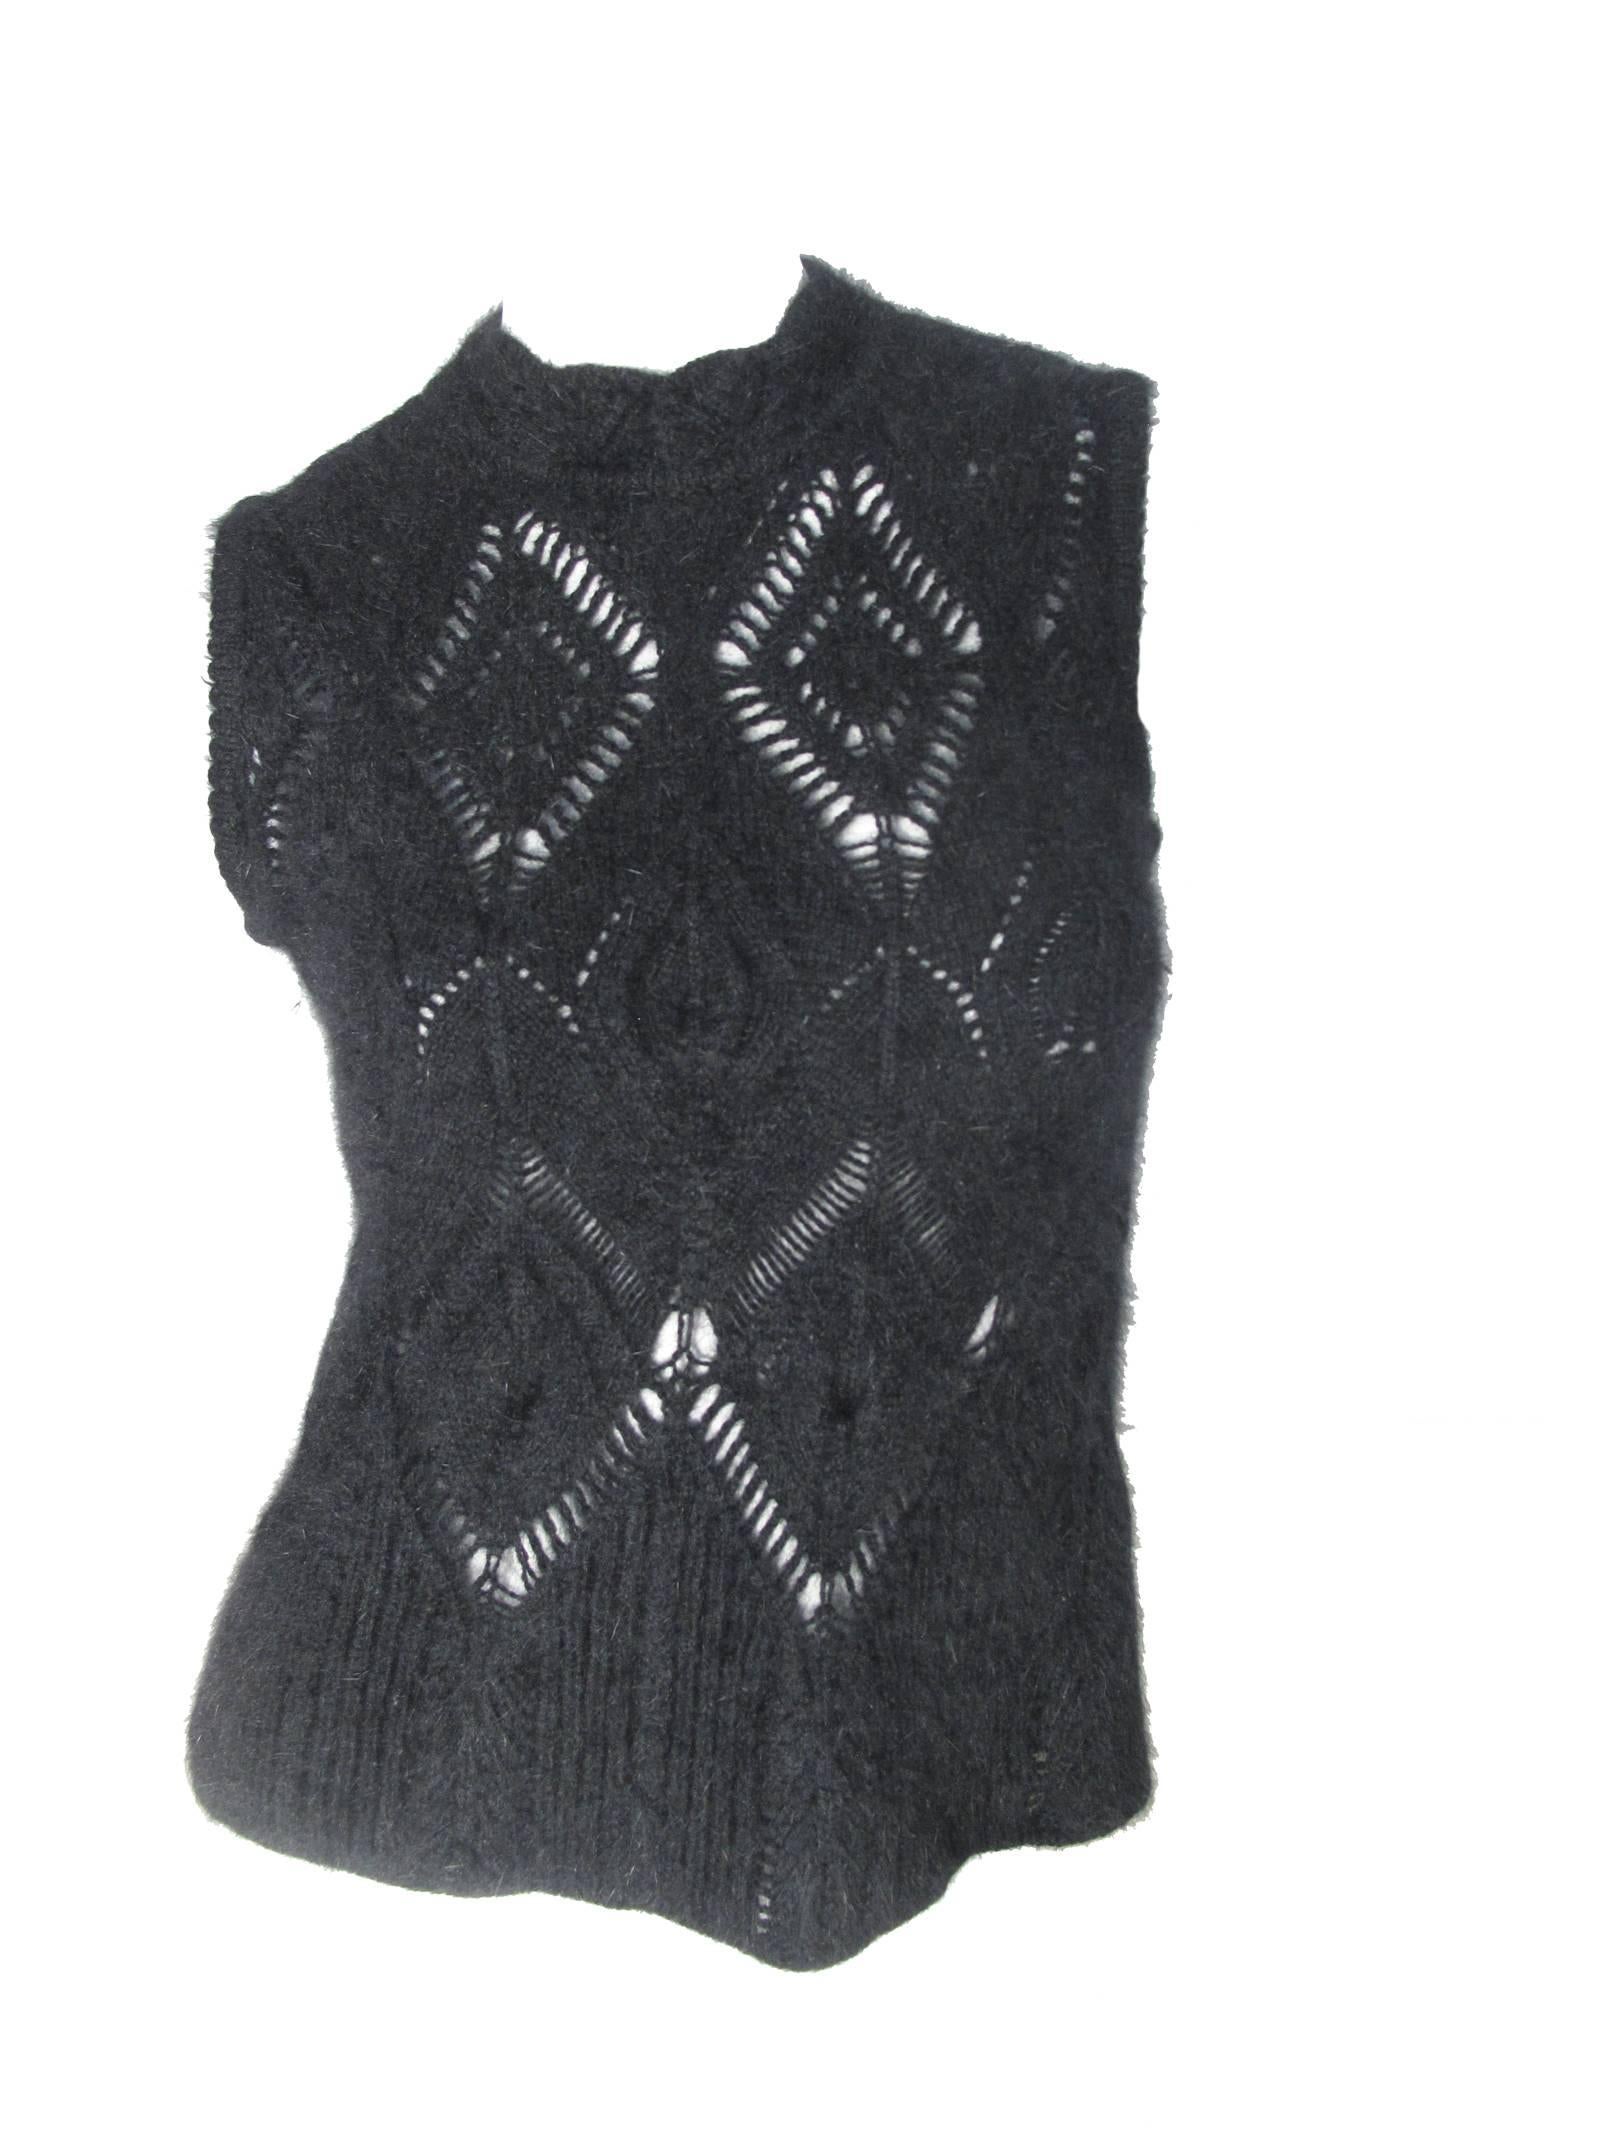 Christian Dior black angora knit cardigan and sleeveless top.  
Condition: Excellent. Size 6

Top: 34 